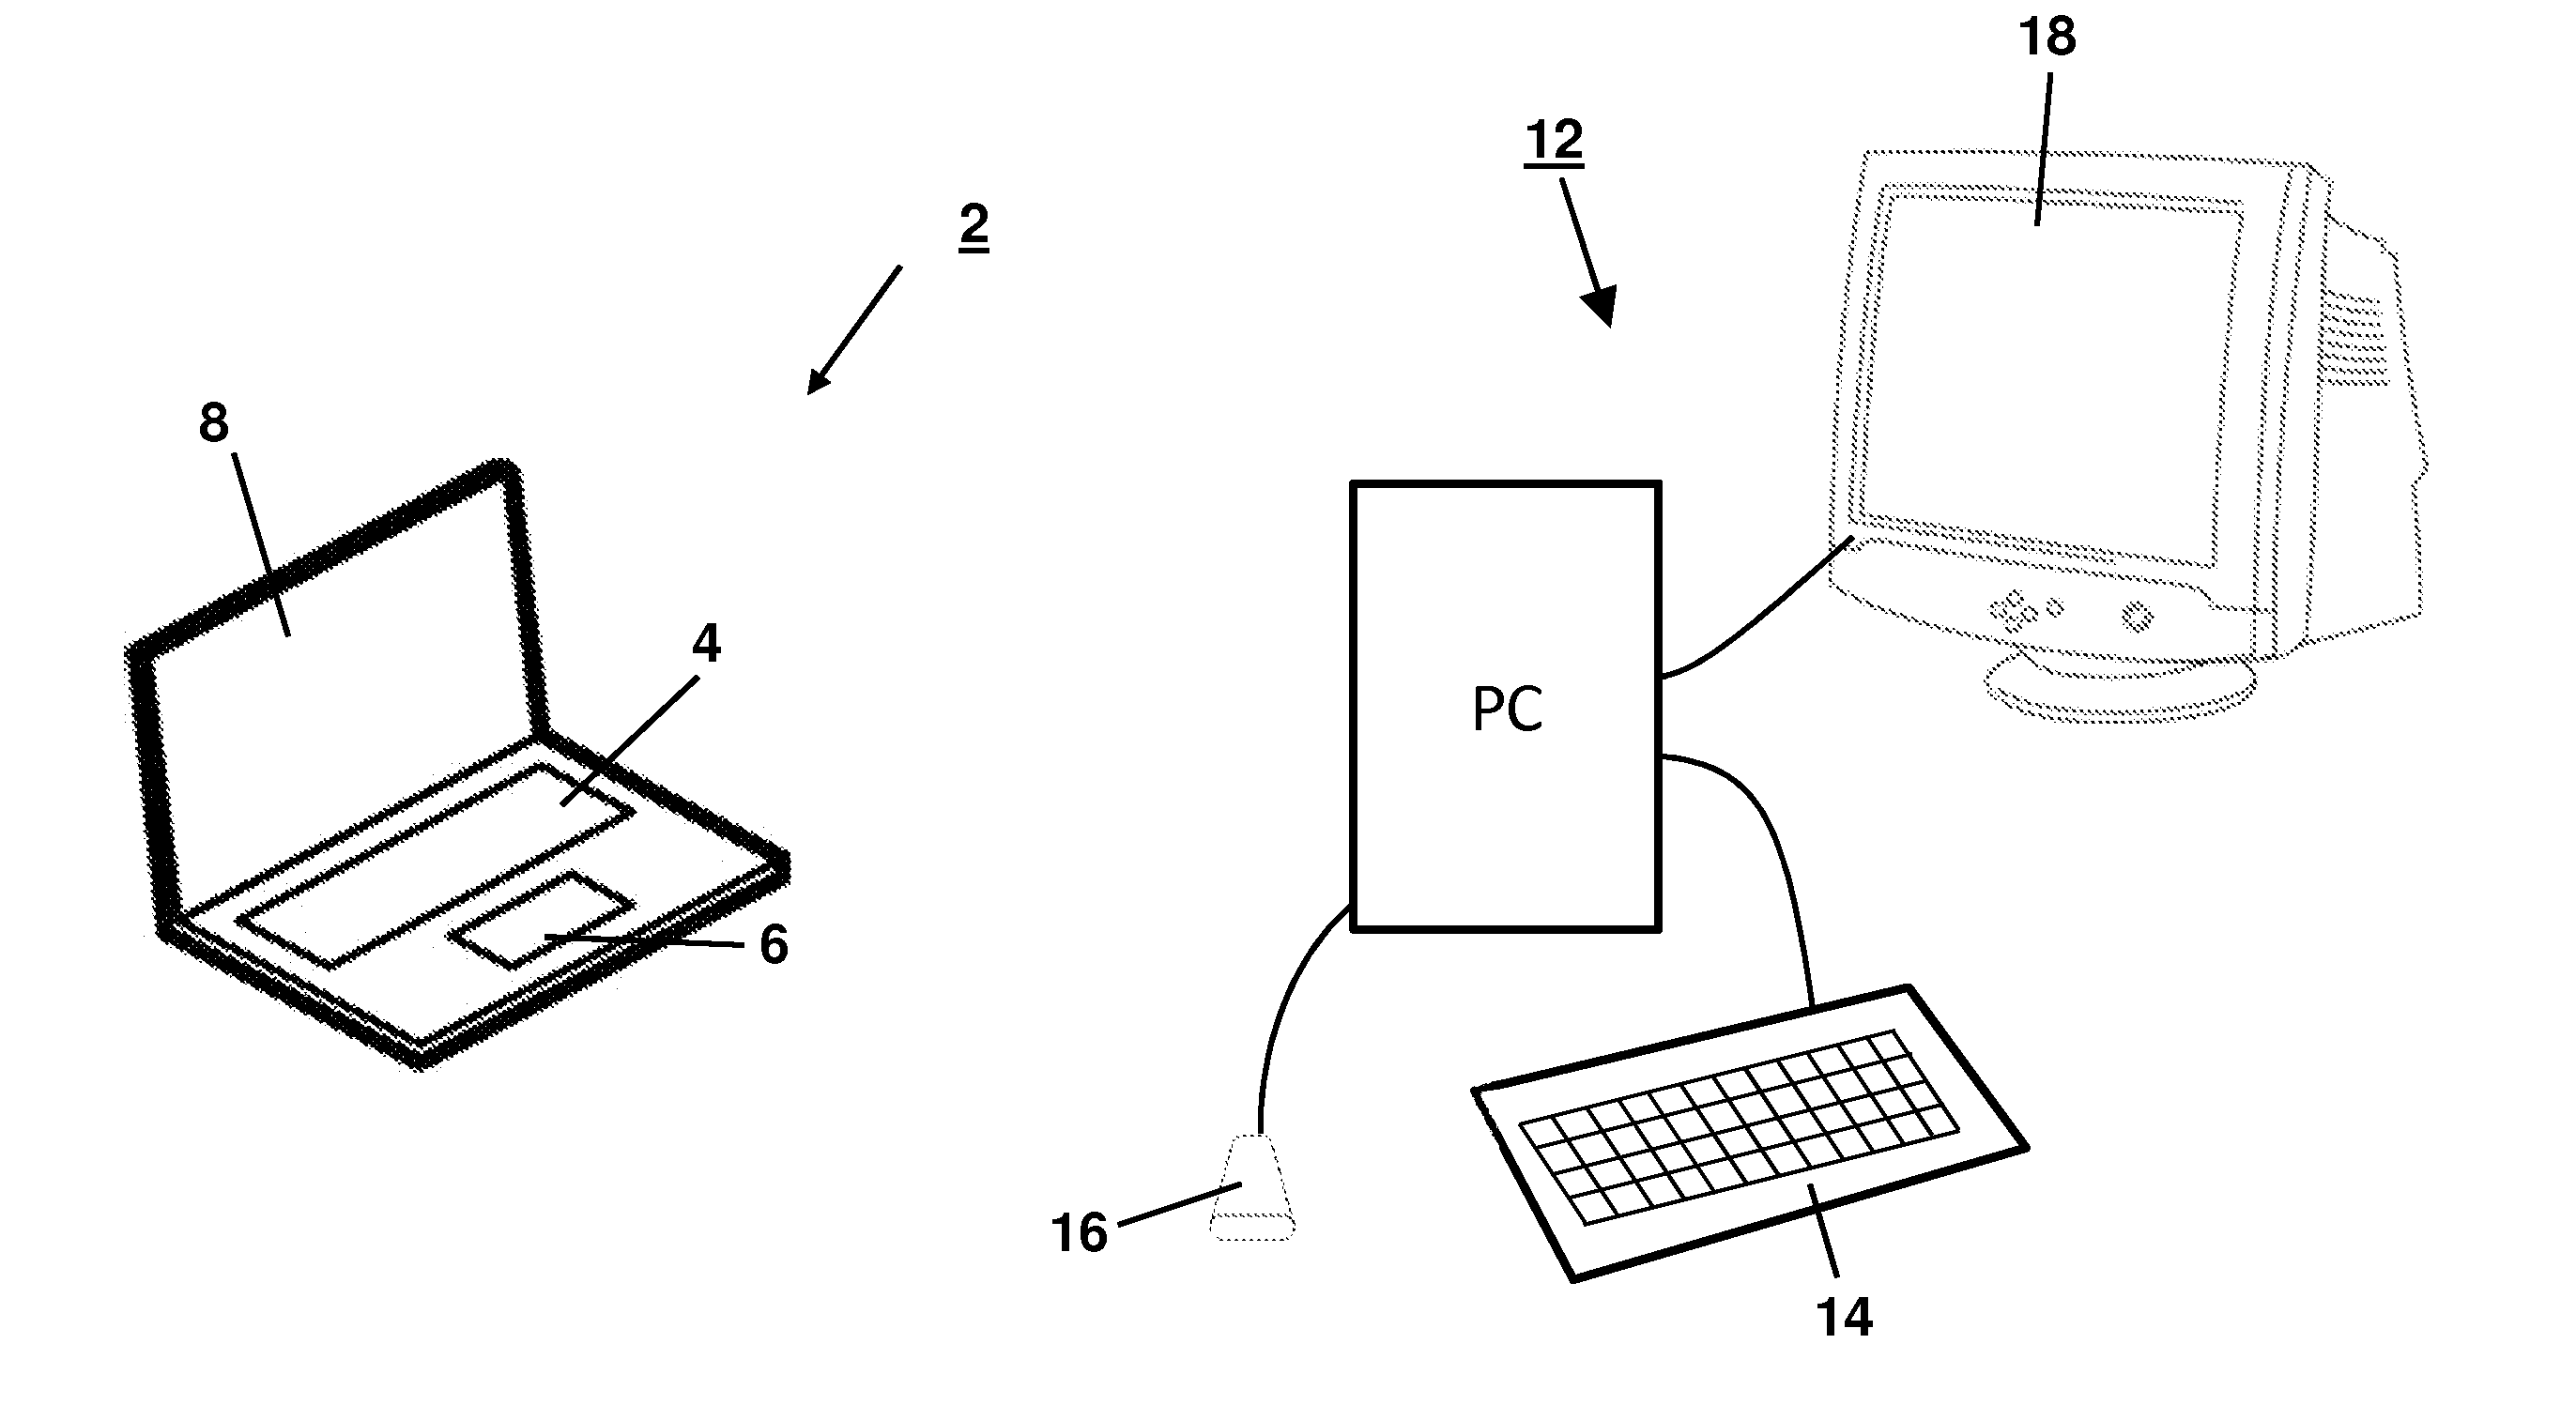 Audio-visual learning system